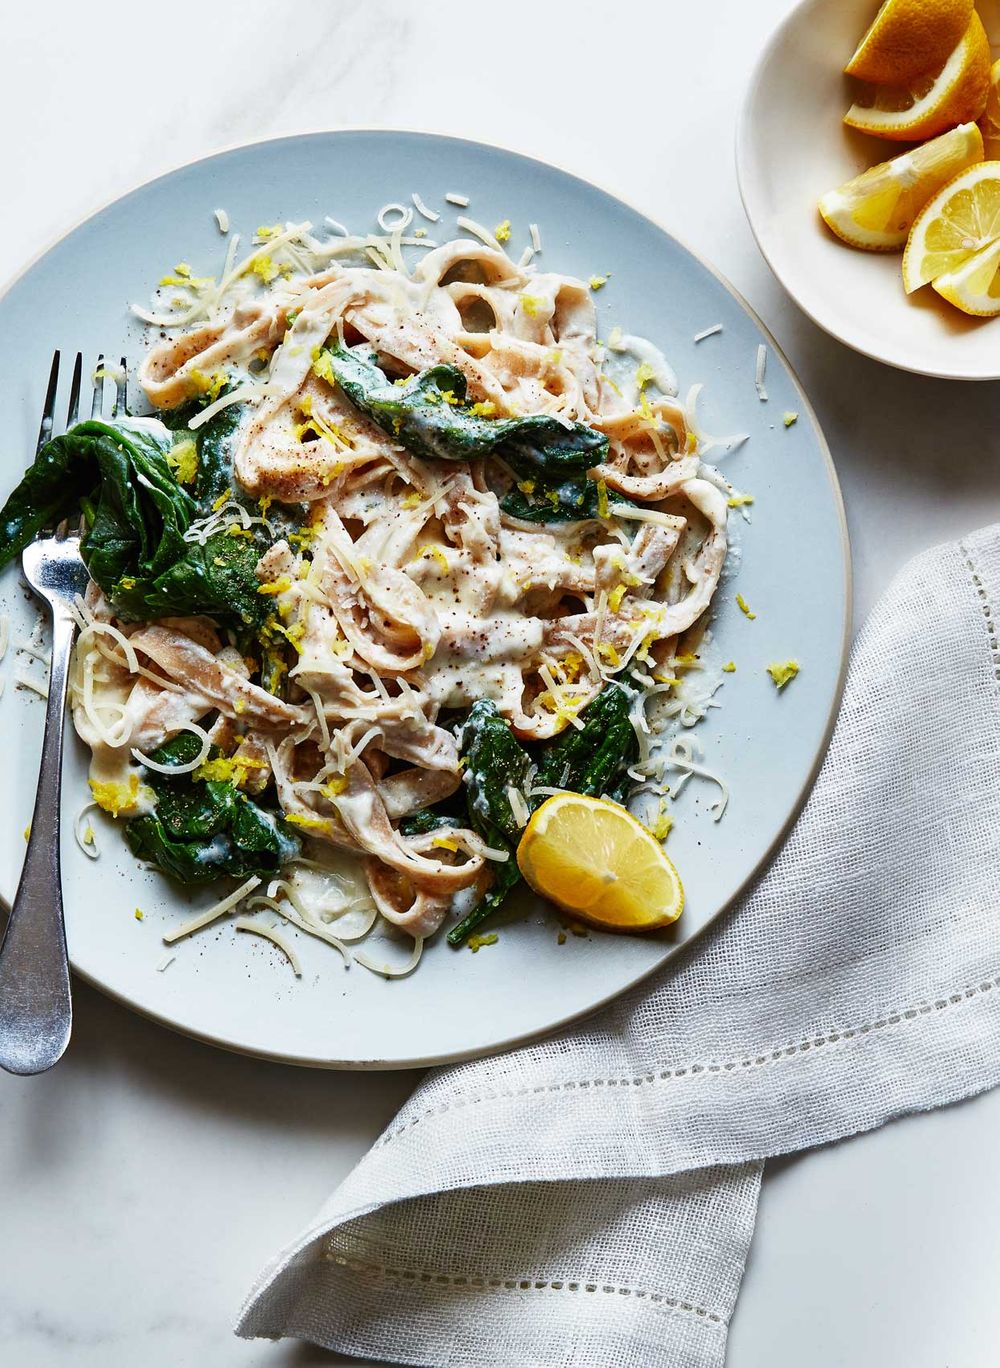 Tagliatelle with ricotta lemon and spinach